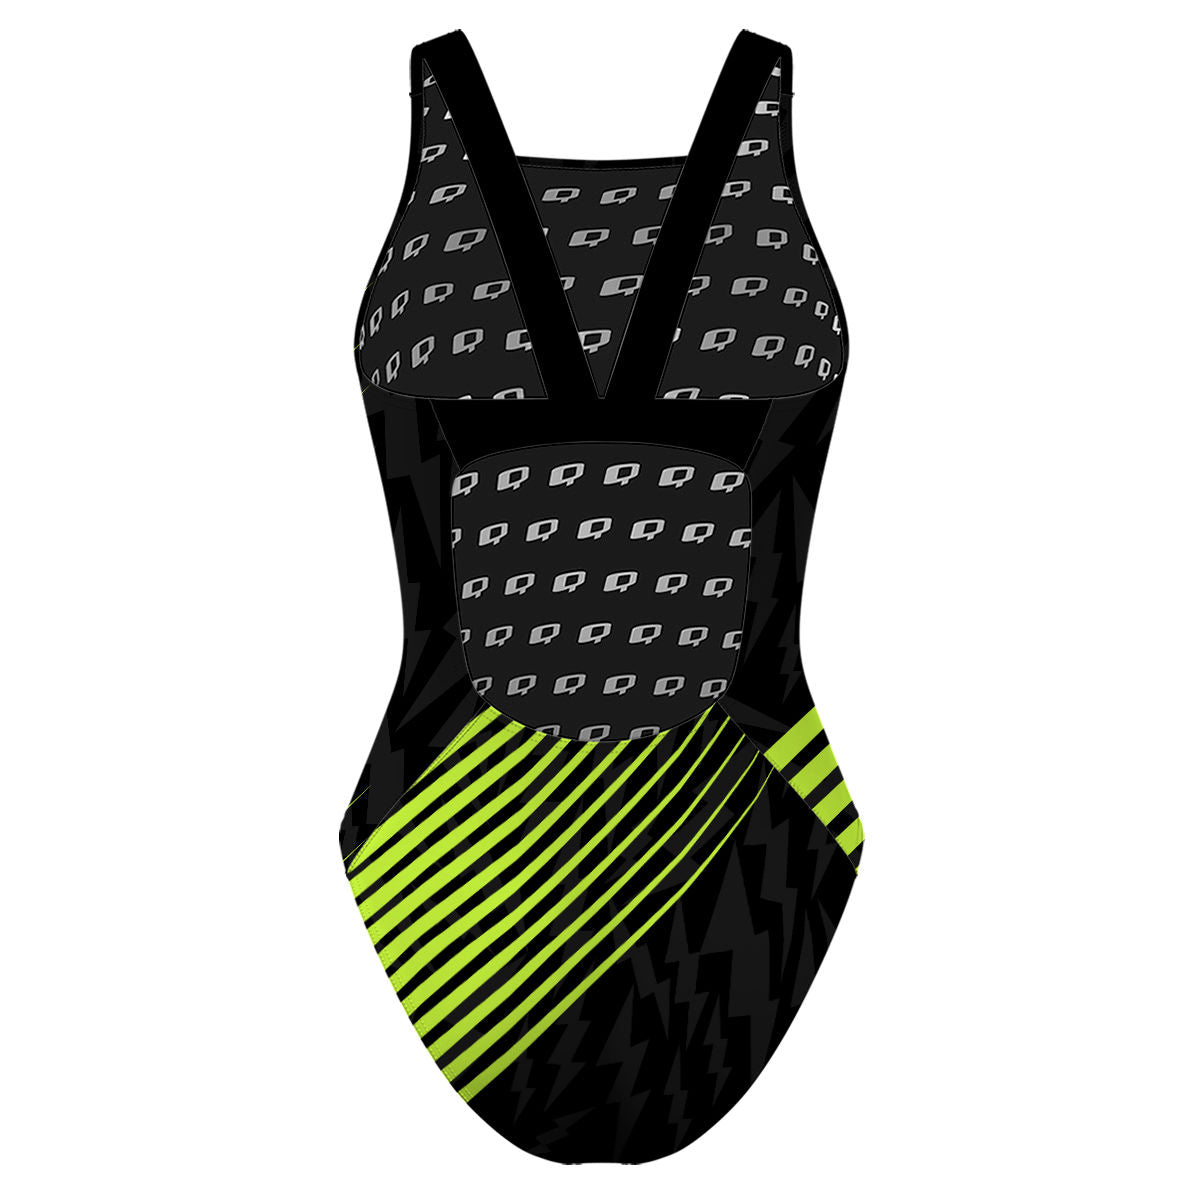 YL Lines - Classic Strap Swimsuit